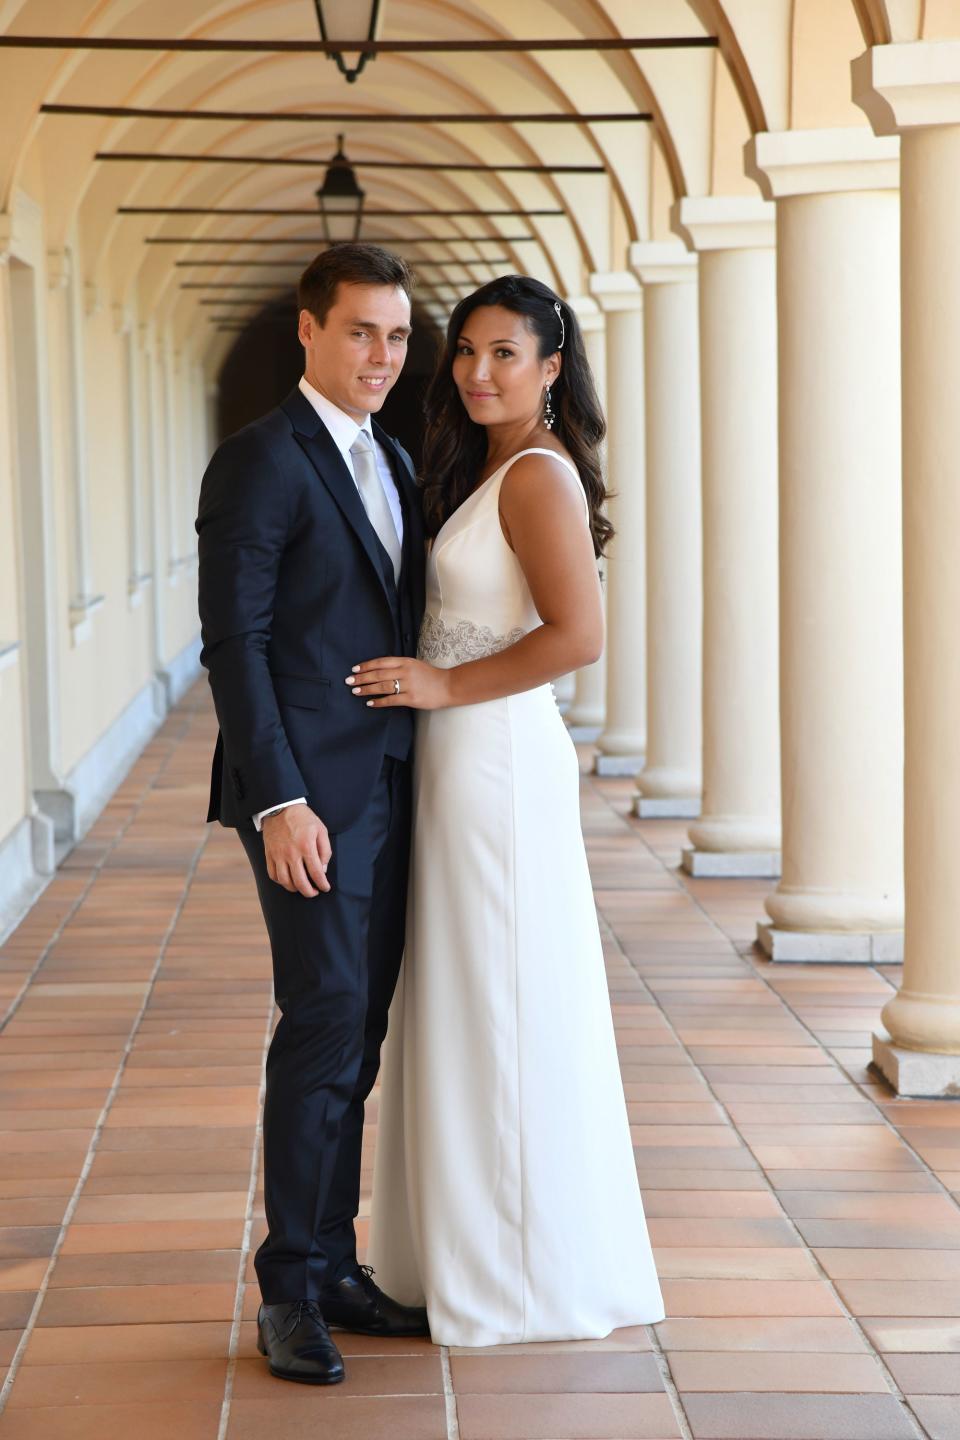 Marie Chevallier and Louis Ducruet after the civil ceremony. Marie is wearing Rosa Clara and Louis is wearing a navy suit made by the Italian house Carlo Pignatelli.